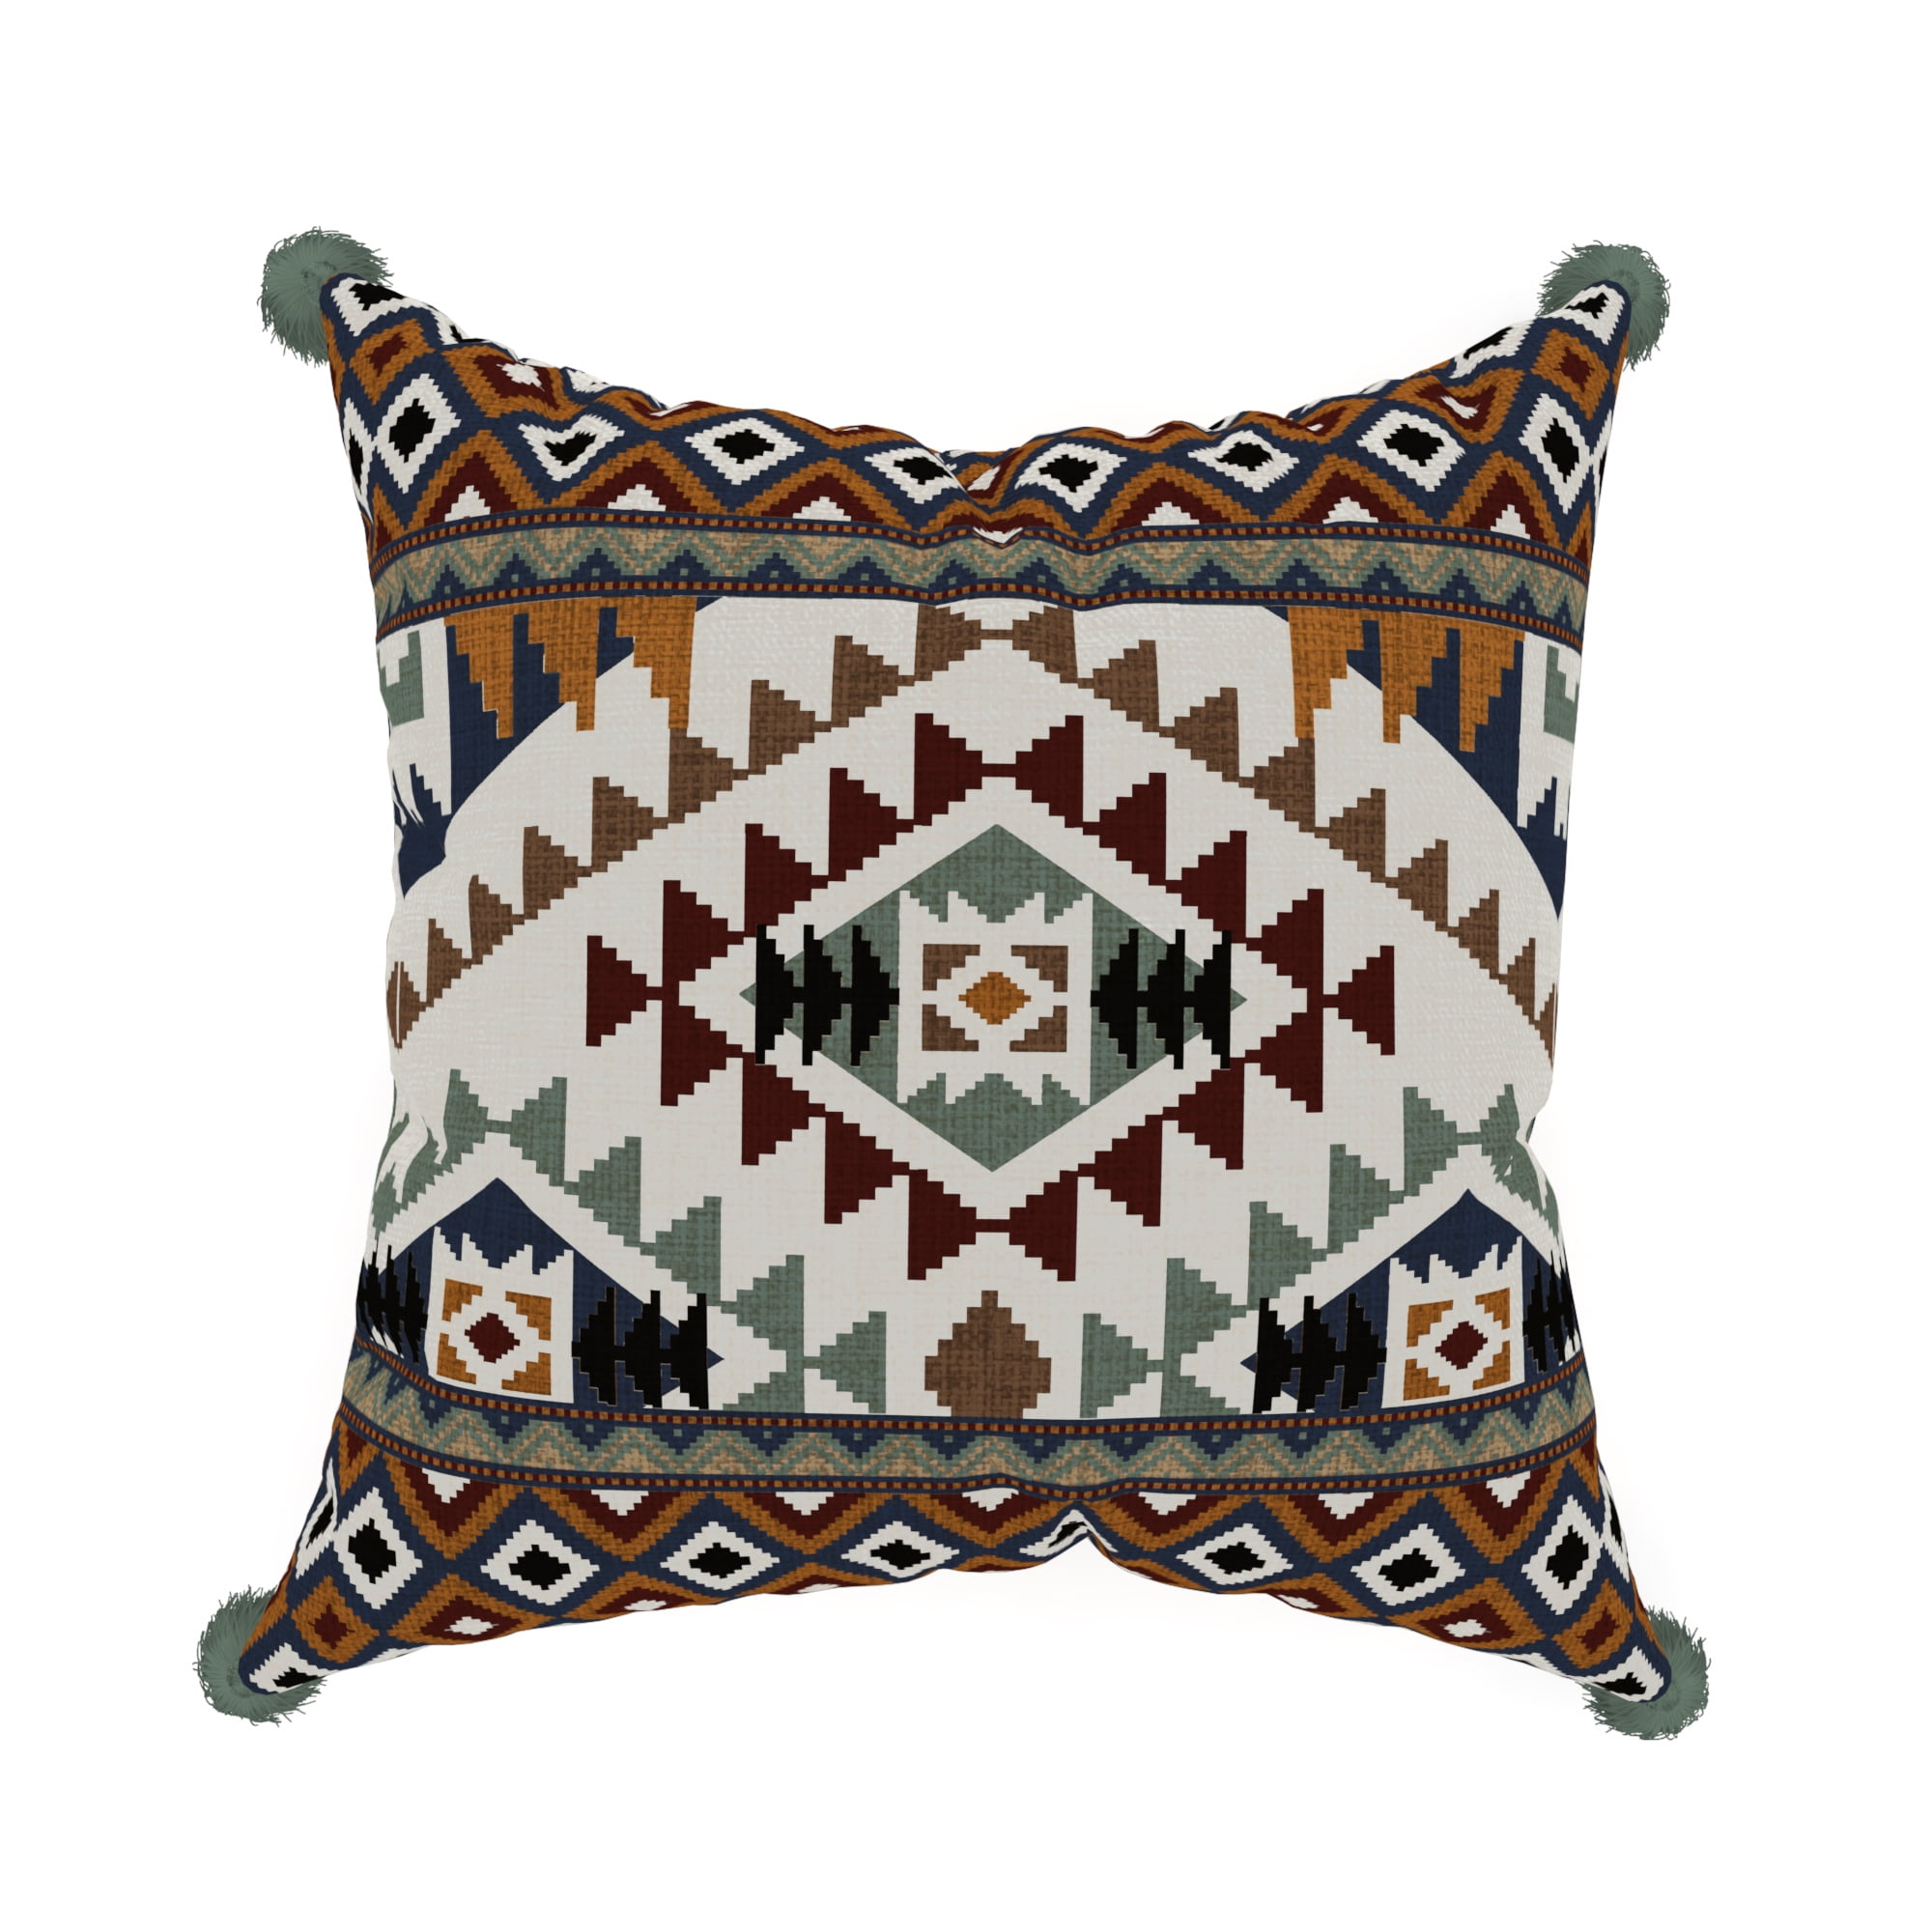 HGOD DESIGNS Boho Chic Aztec Stripe Throw Pillow Cover Bright Colored Style Abstract Pillow Cases Cotton Linen Square Cushion Covers for Home Sofa Couch 18x18 inch Colorful